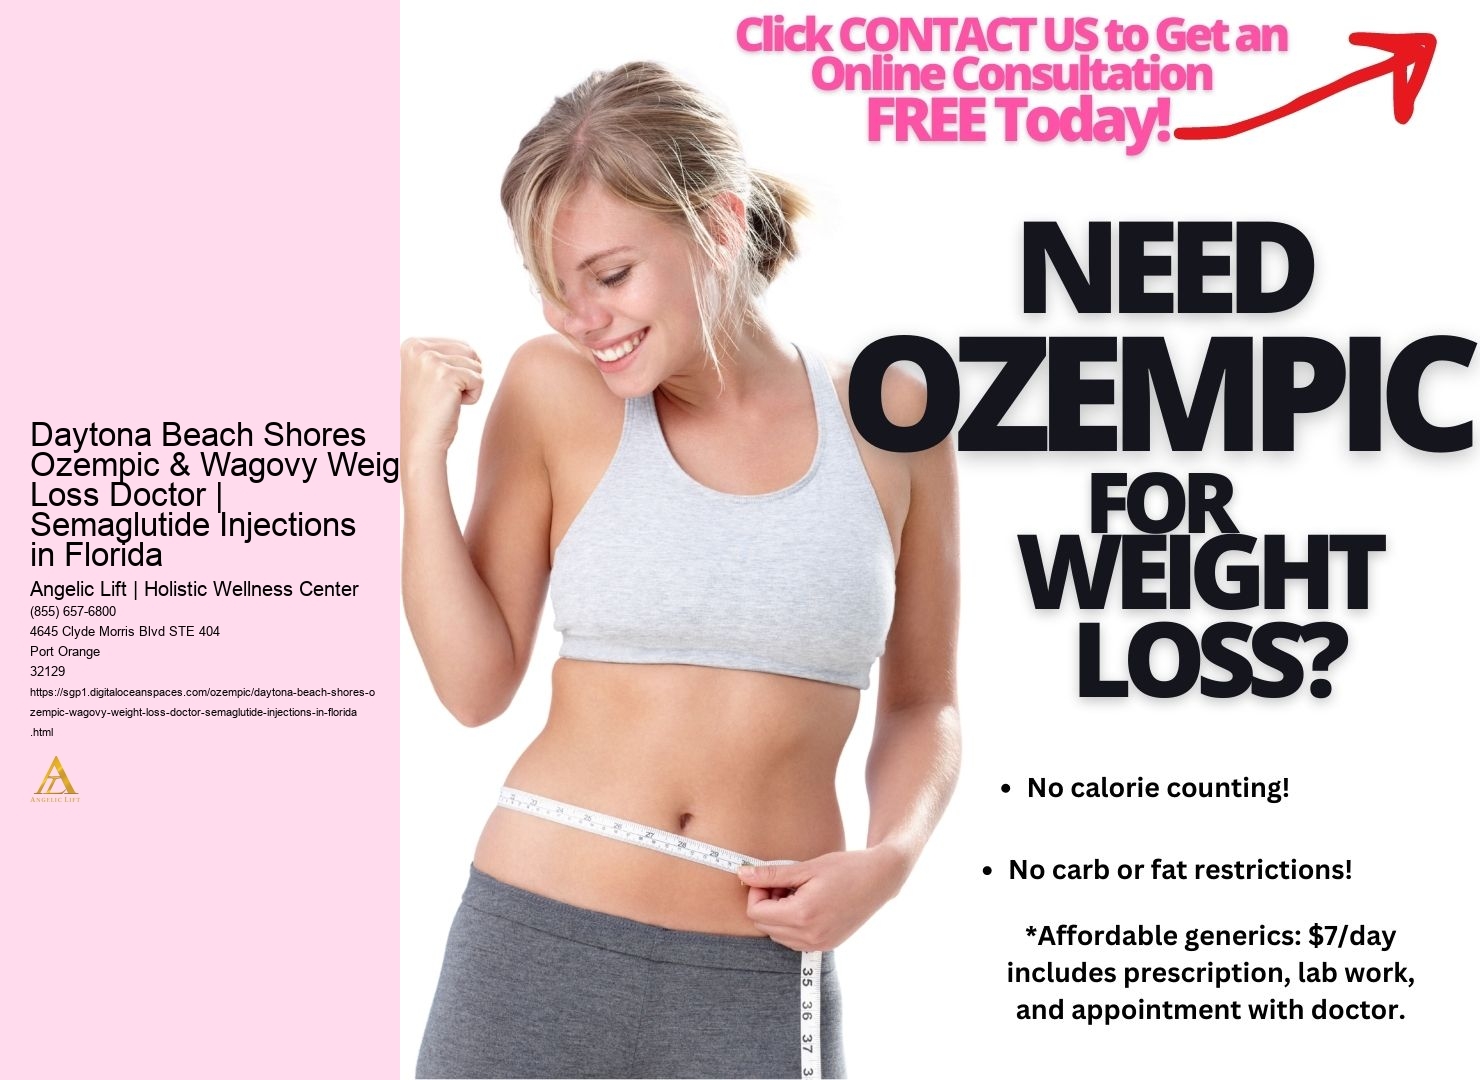 Daytona Beach Shores Ozempic & Wagovy Weight Loss Doctor | Semaglutide Injections in Florida